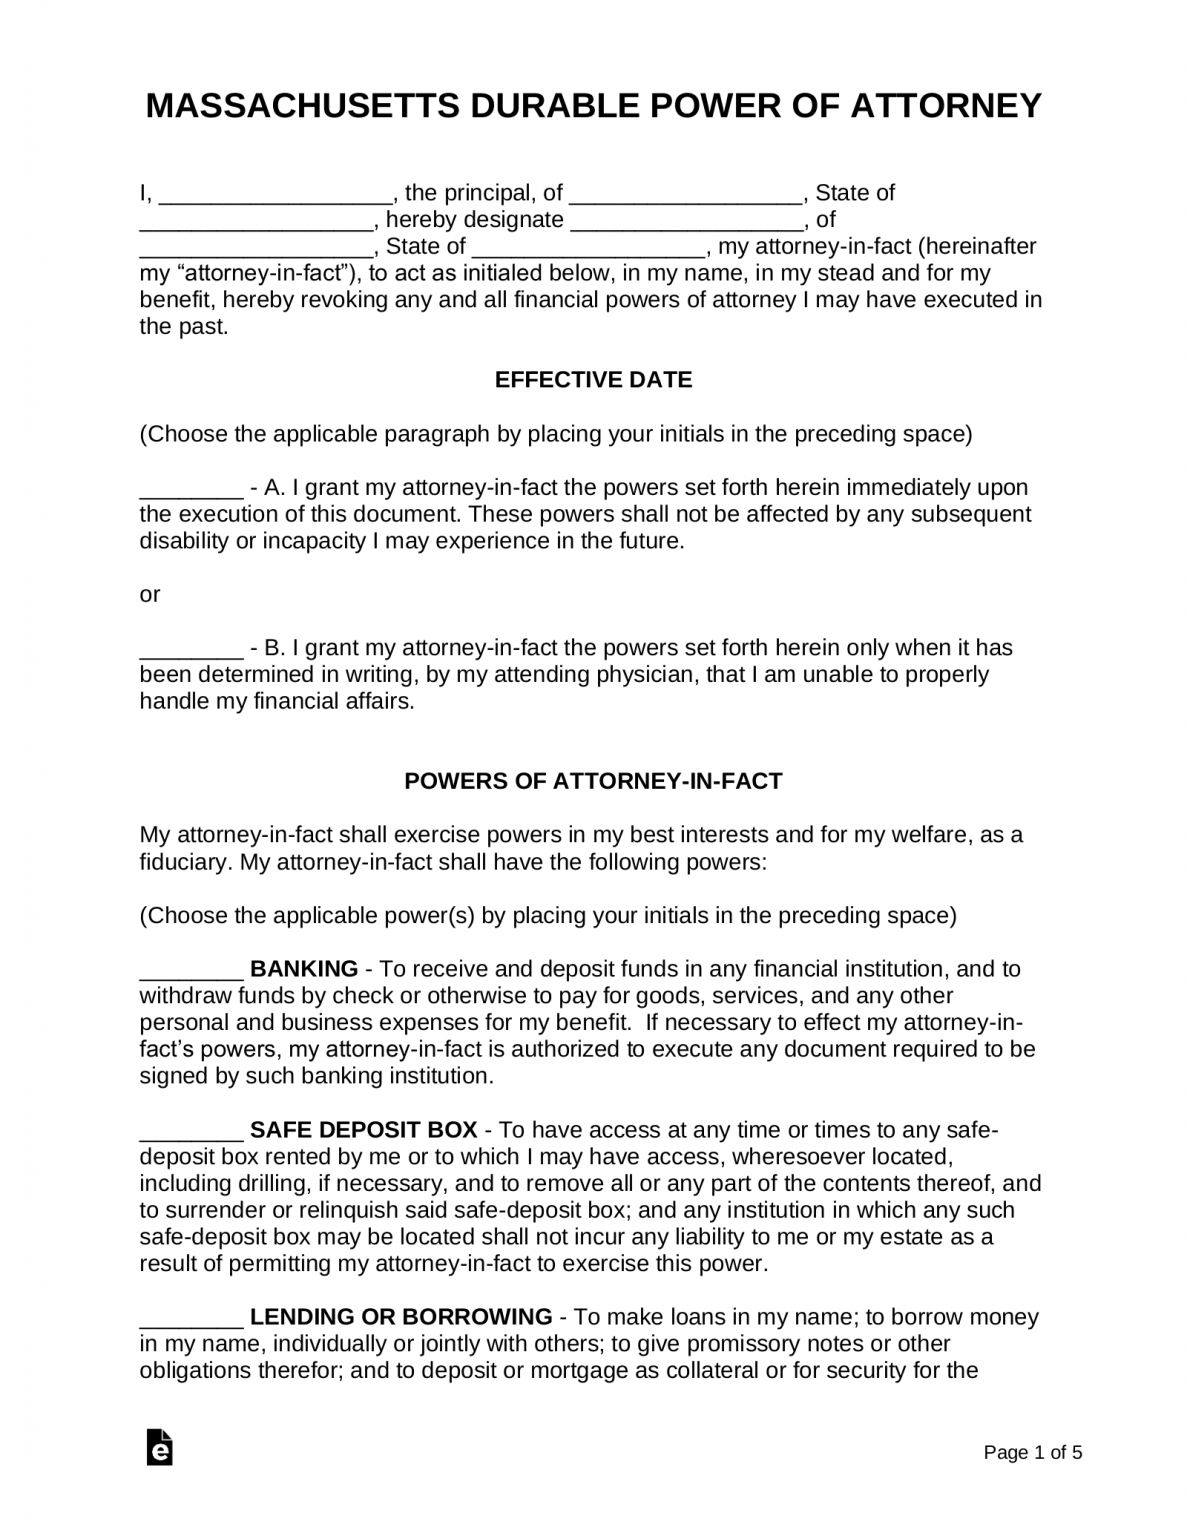 free-durable-power-of-attorney-massachusetts-form-fillable-pdf